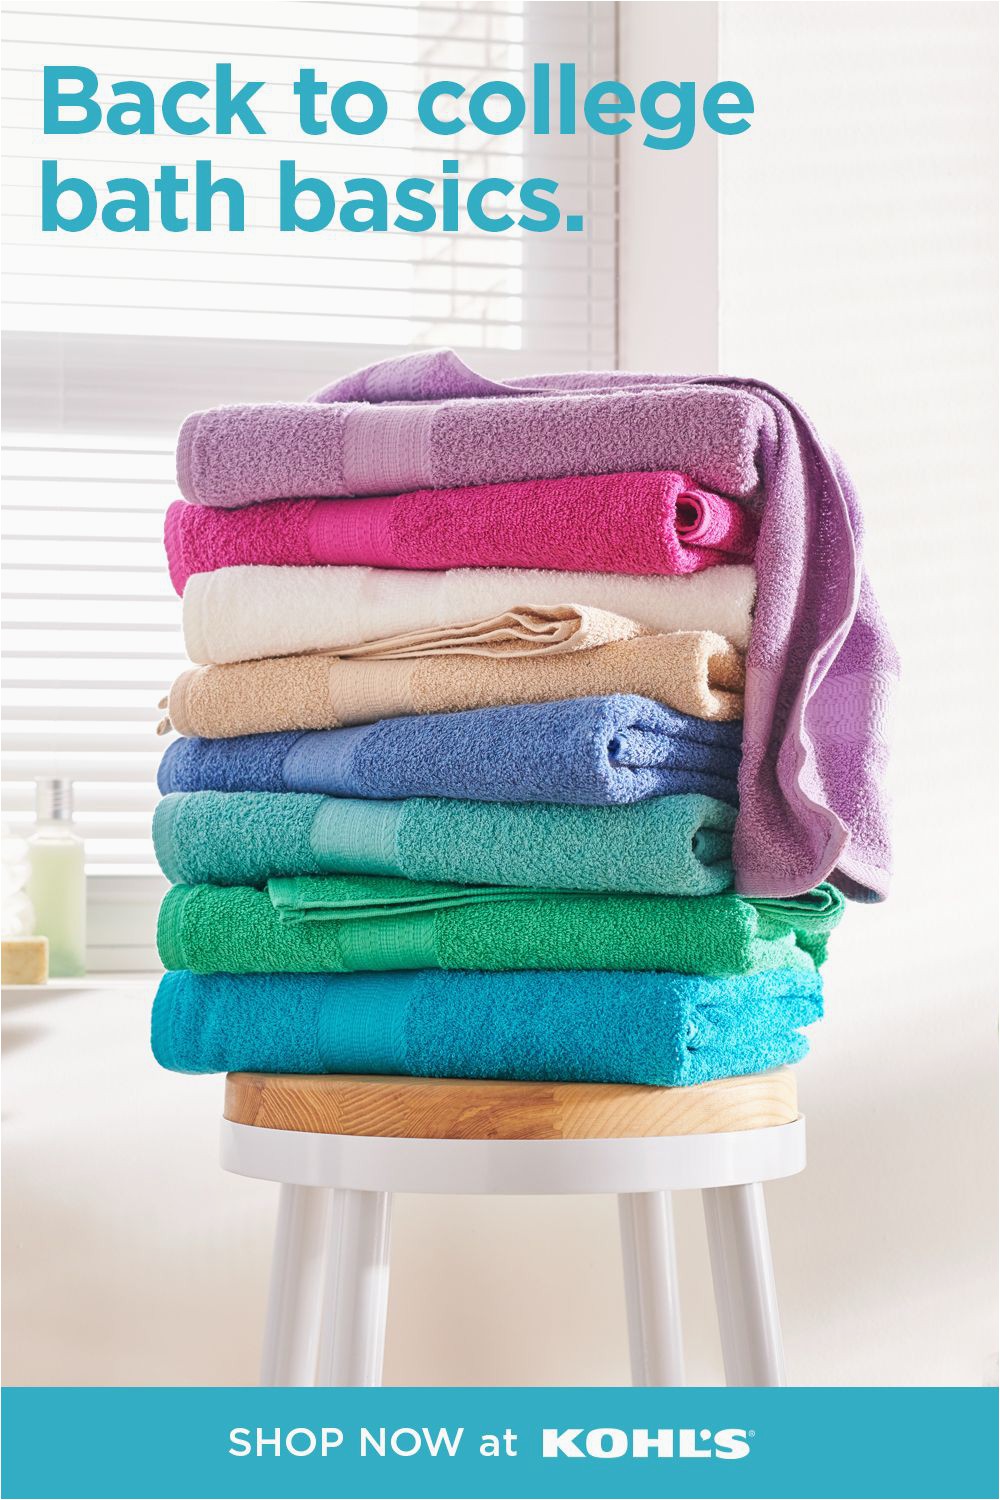 Kohl S Bath towels and Rugs Shop Bathroom Basics for Back to College at Kohl S In 2020